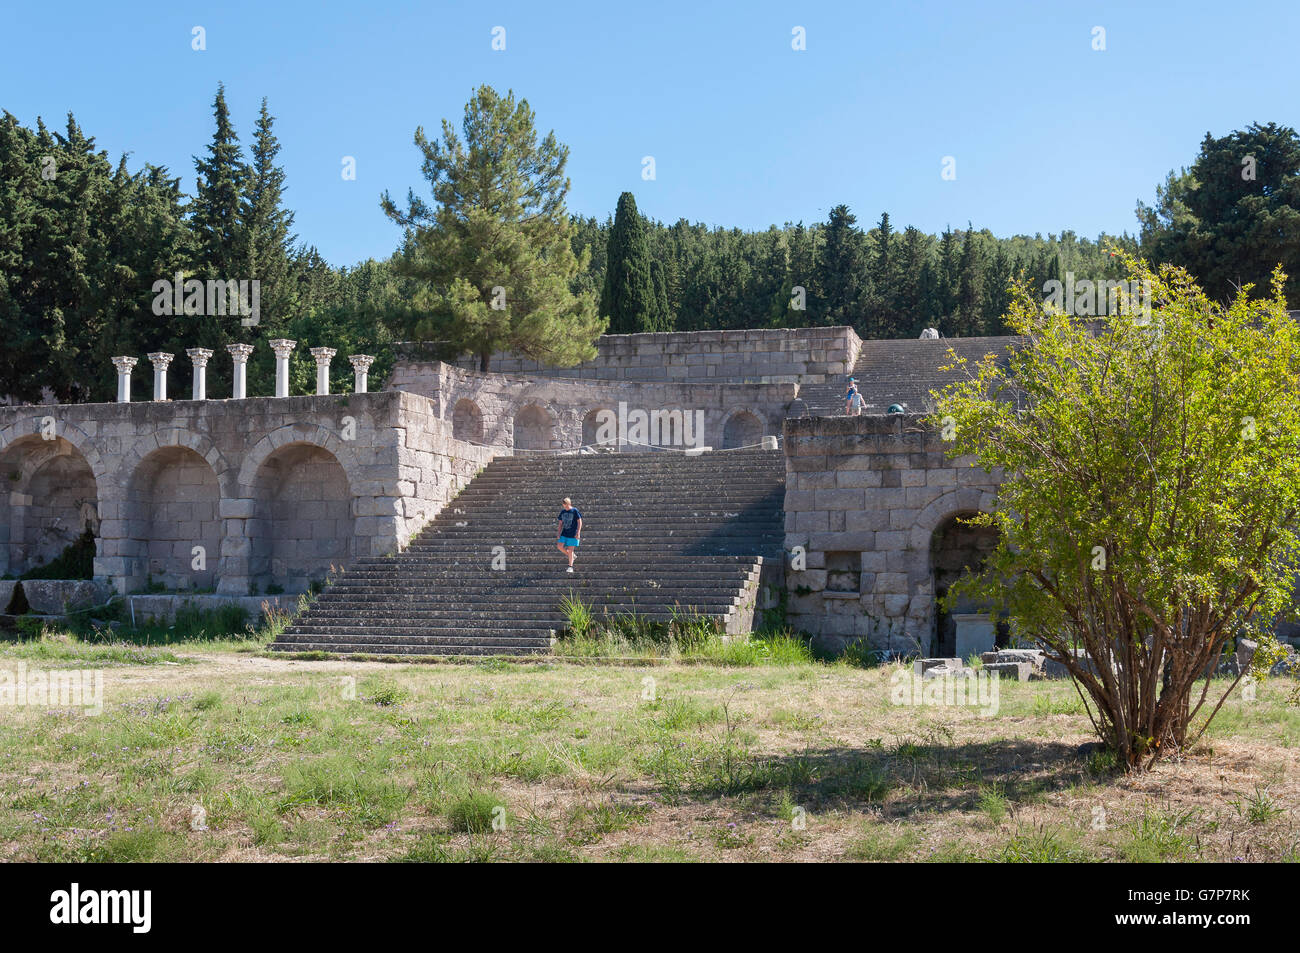 The lower terrace of The Asklepieion, Platani, Kos Town, Kos (Cos), The Dodecanese, South Aegean Region, Greece Stock Photo